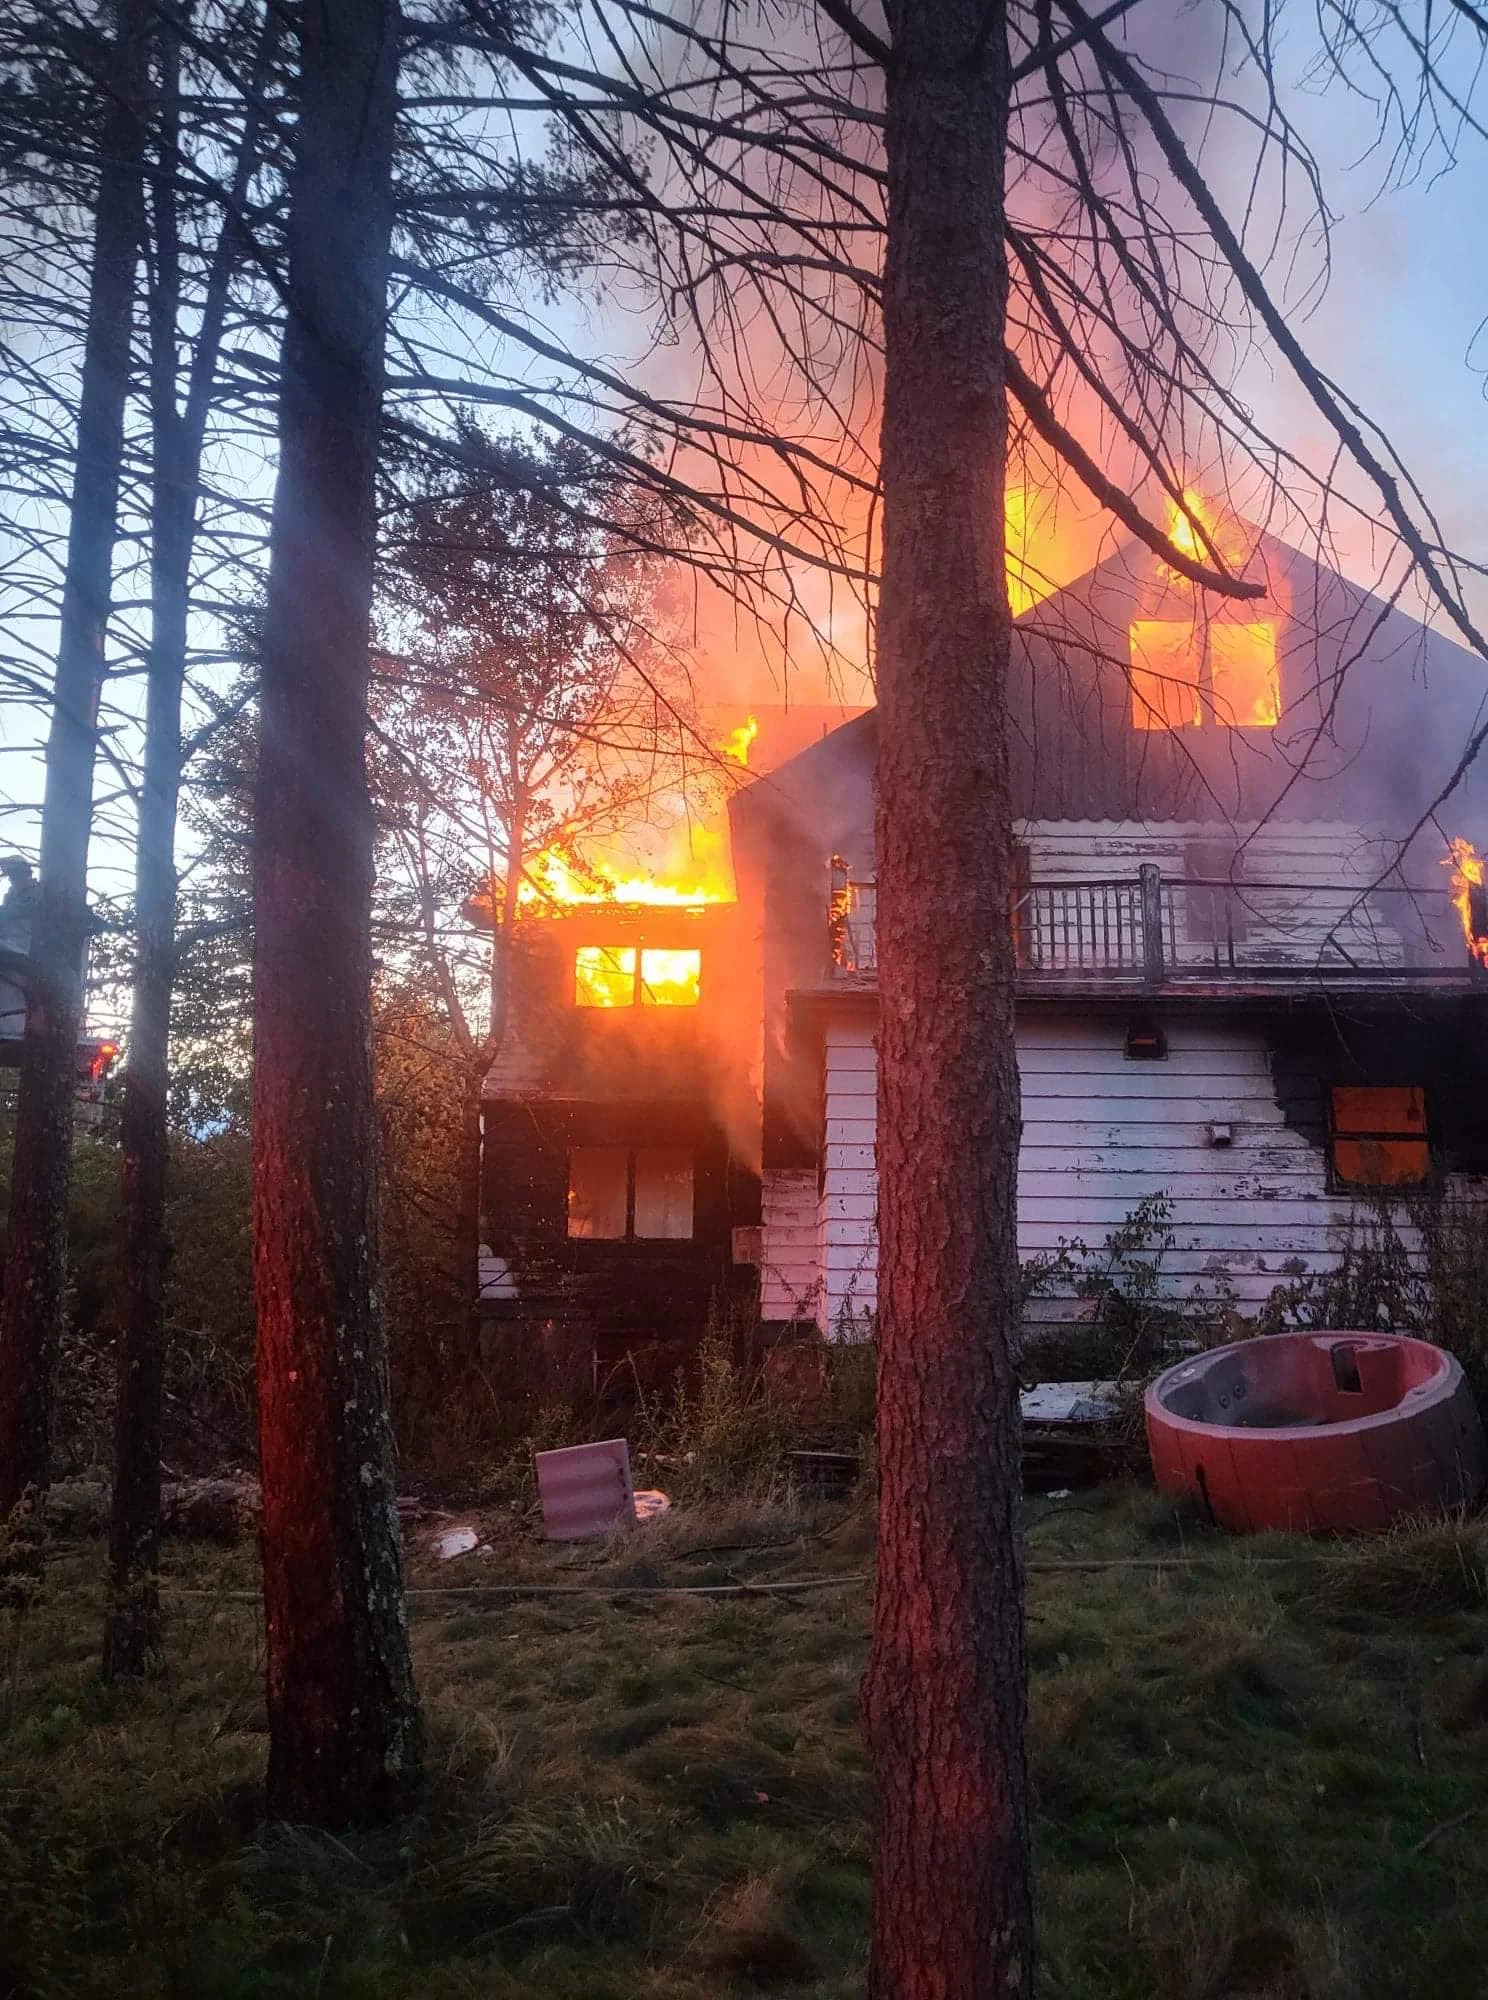 Upstate New York Hotel That Inspired Dirty Dancing Destroyed image picture